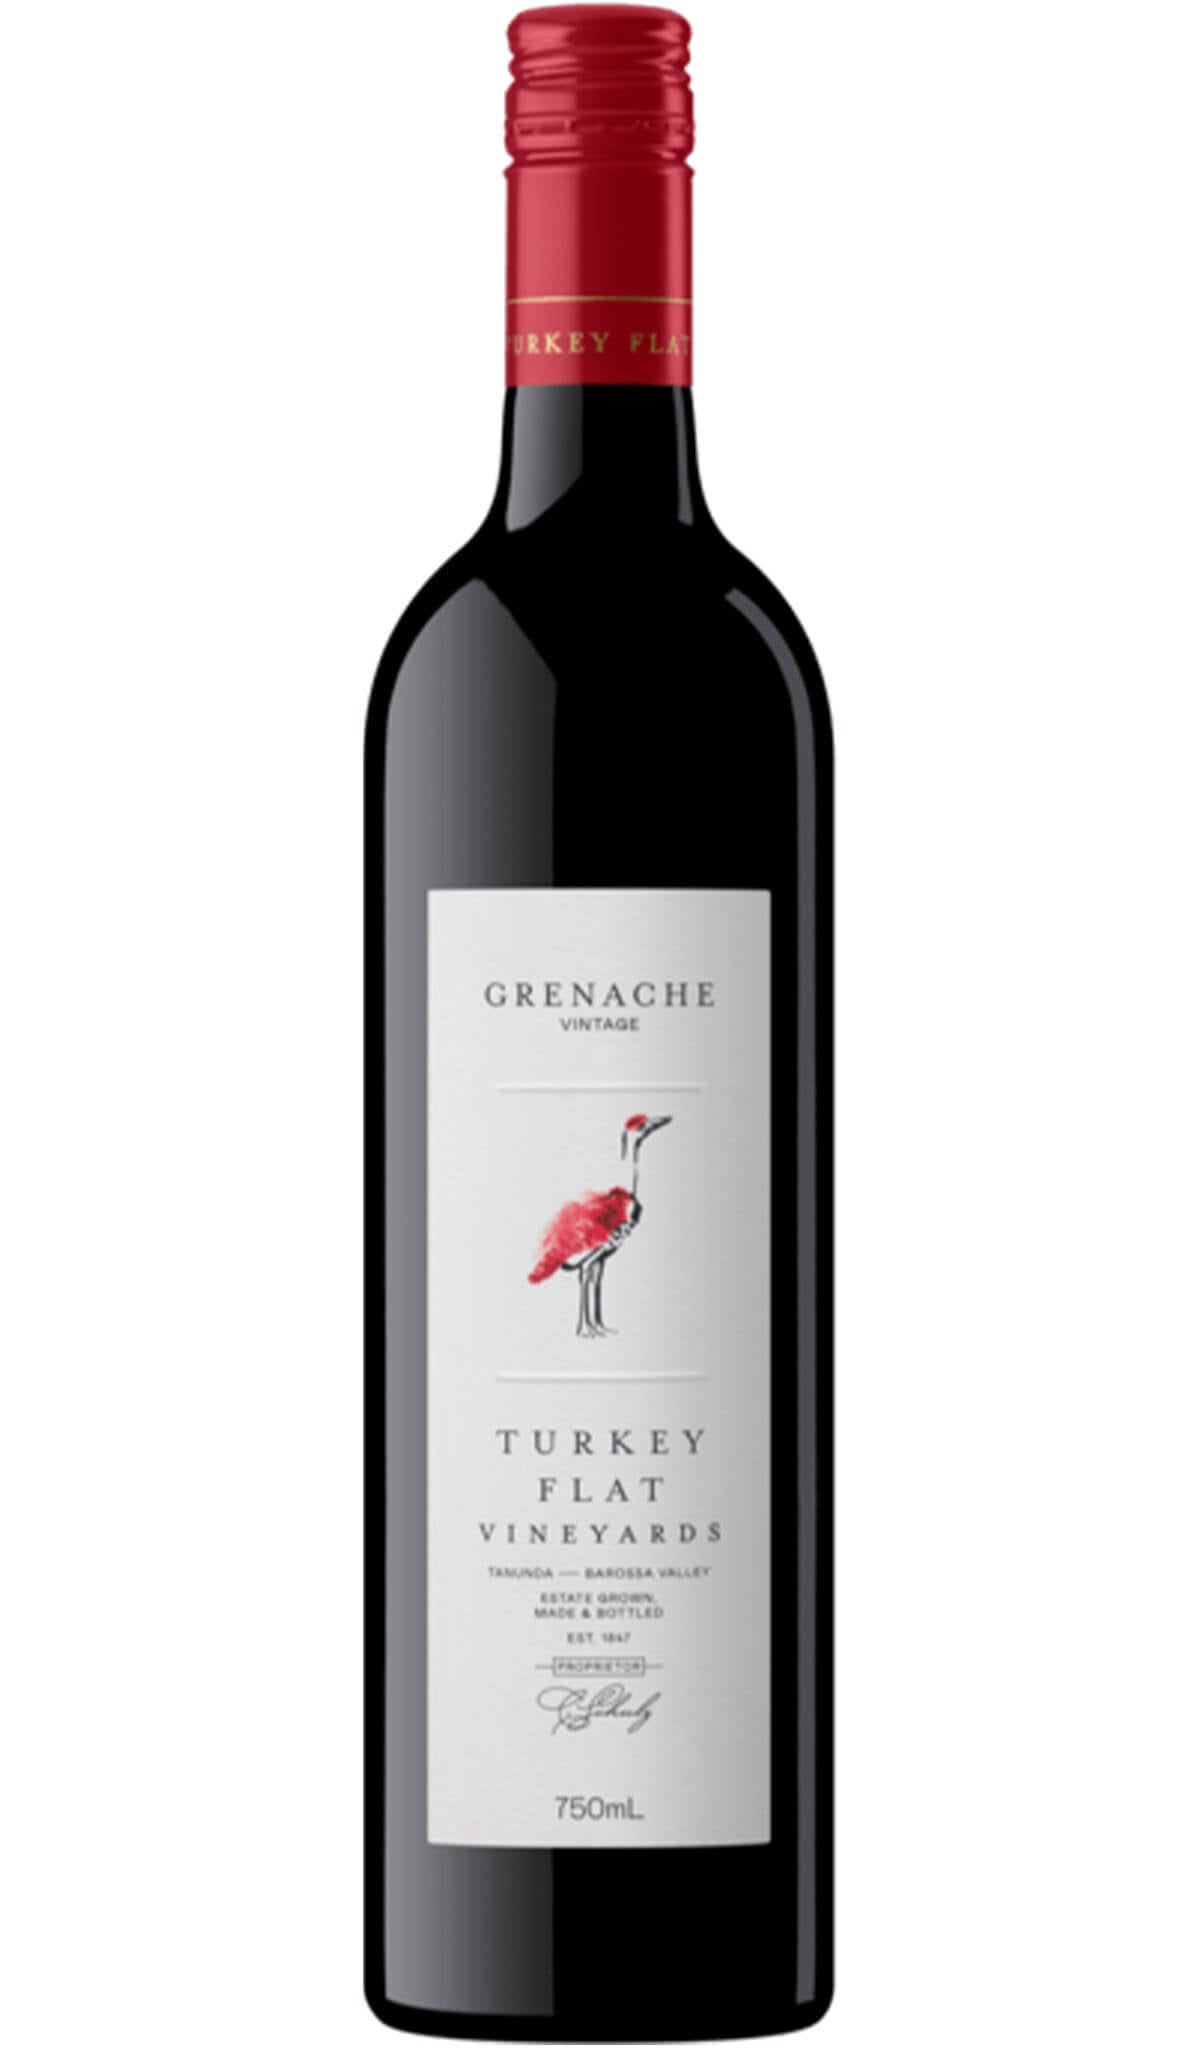 Find out more or buy Turkey Flat Grenache 2021 (Barossa Valley) online at Wine Sellers Direct - Australia’s independent liquor specialists.